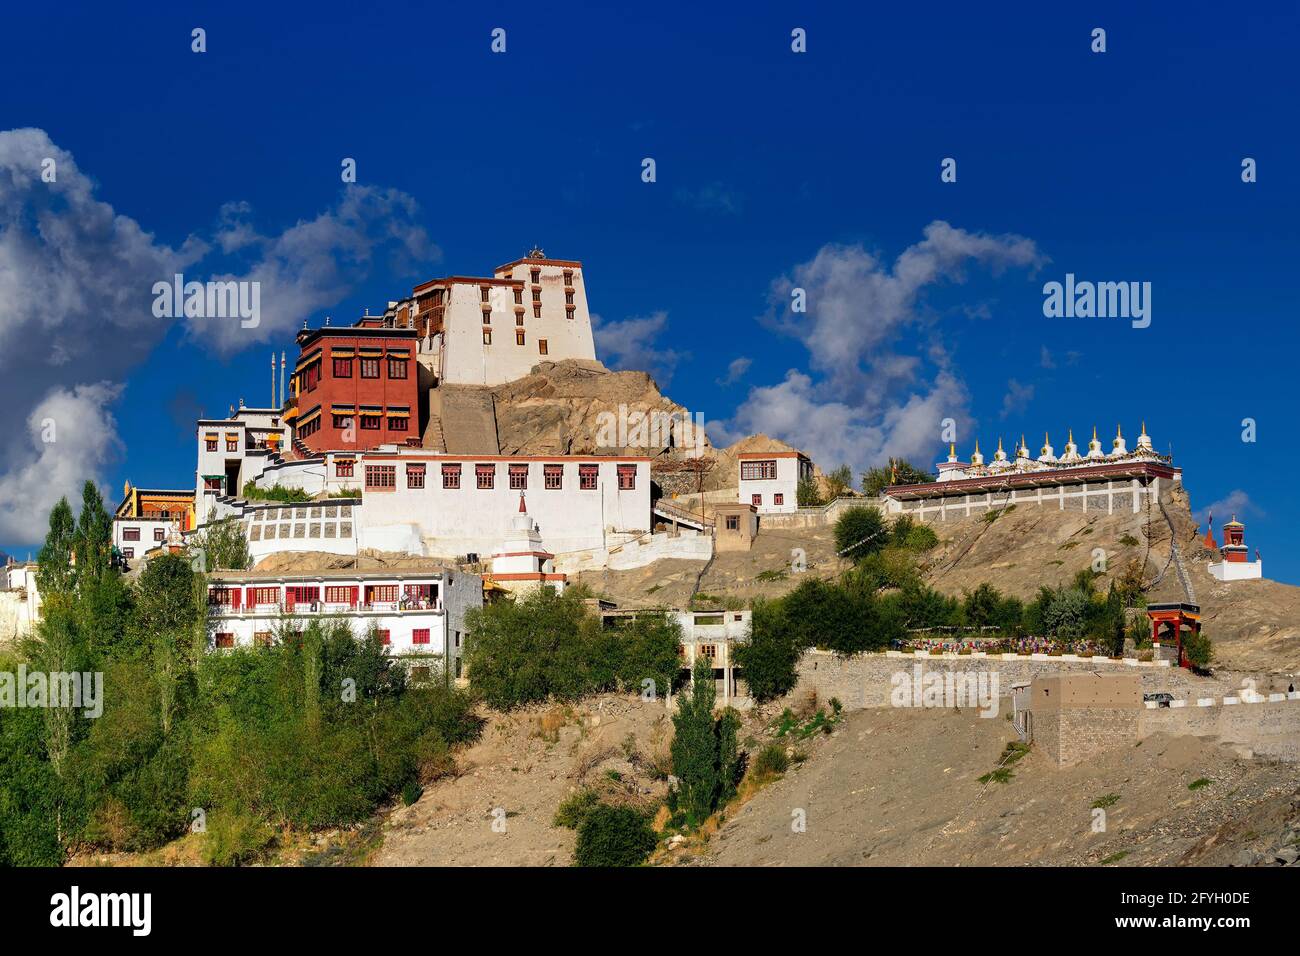 Thiksay monastery with view of Himalayan mountians and blue sky with white clouds  in background,Ladakh,Jammu and Kashmir, India Stock Photo